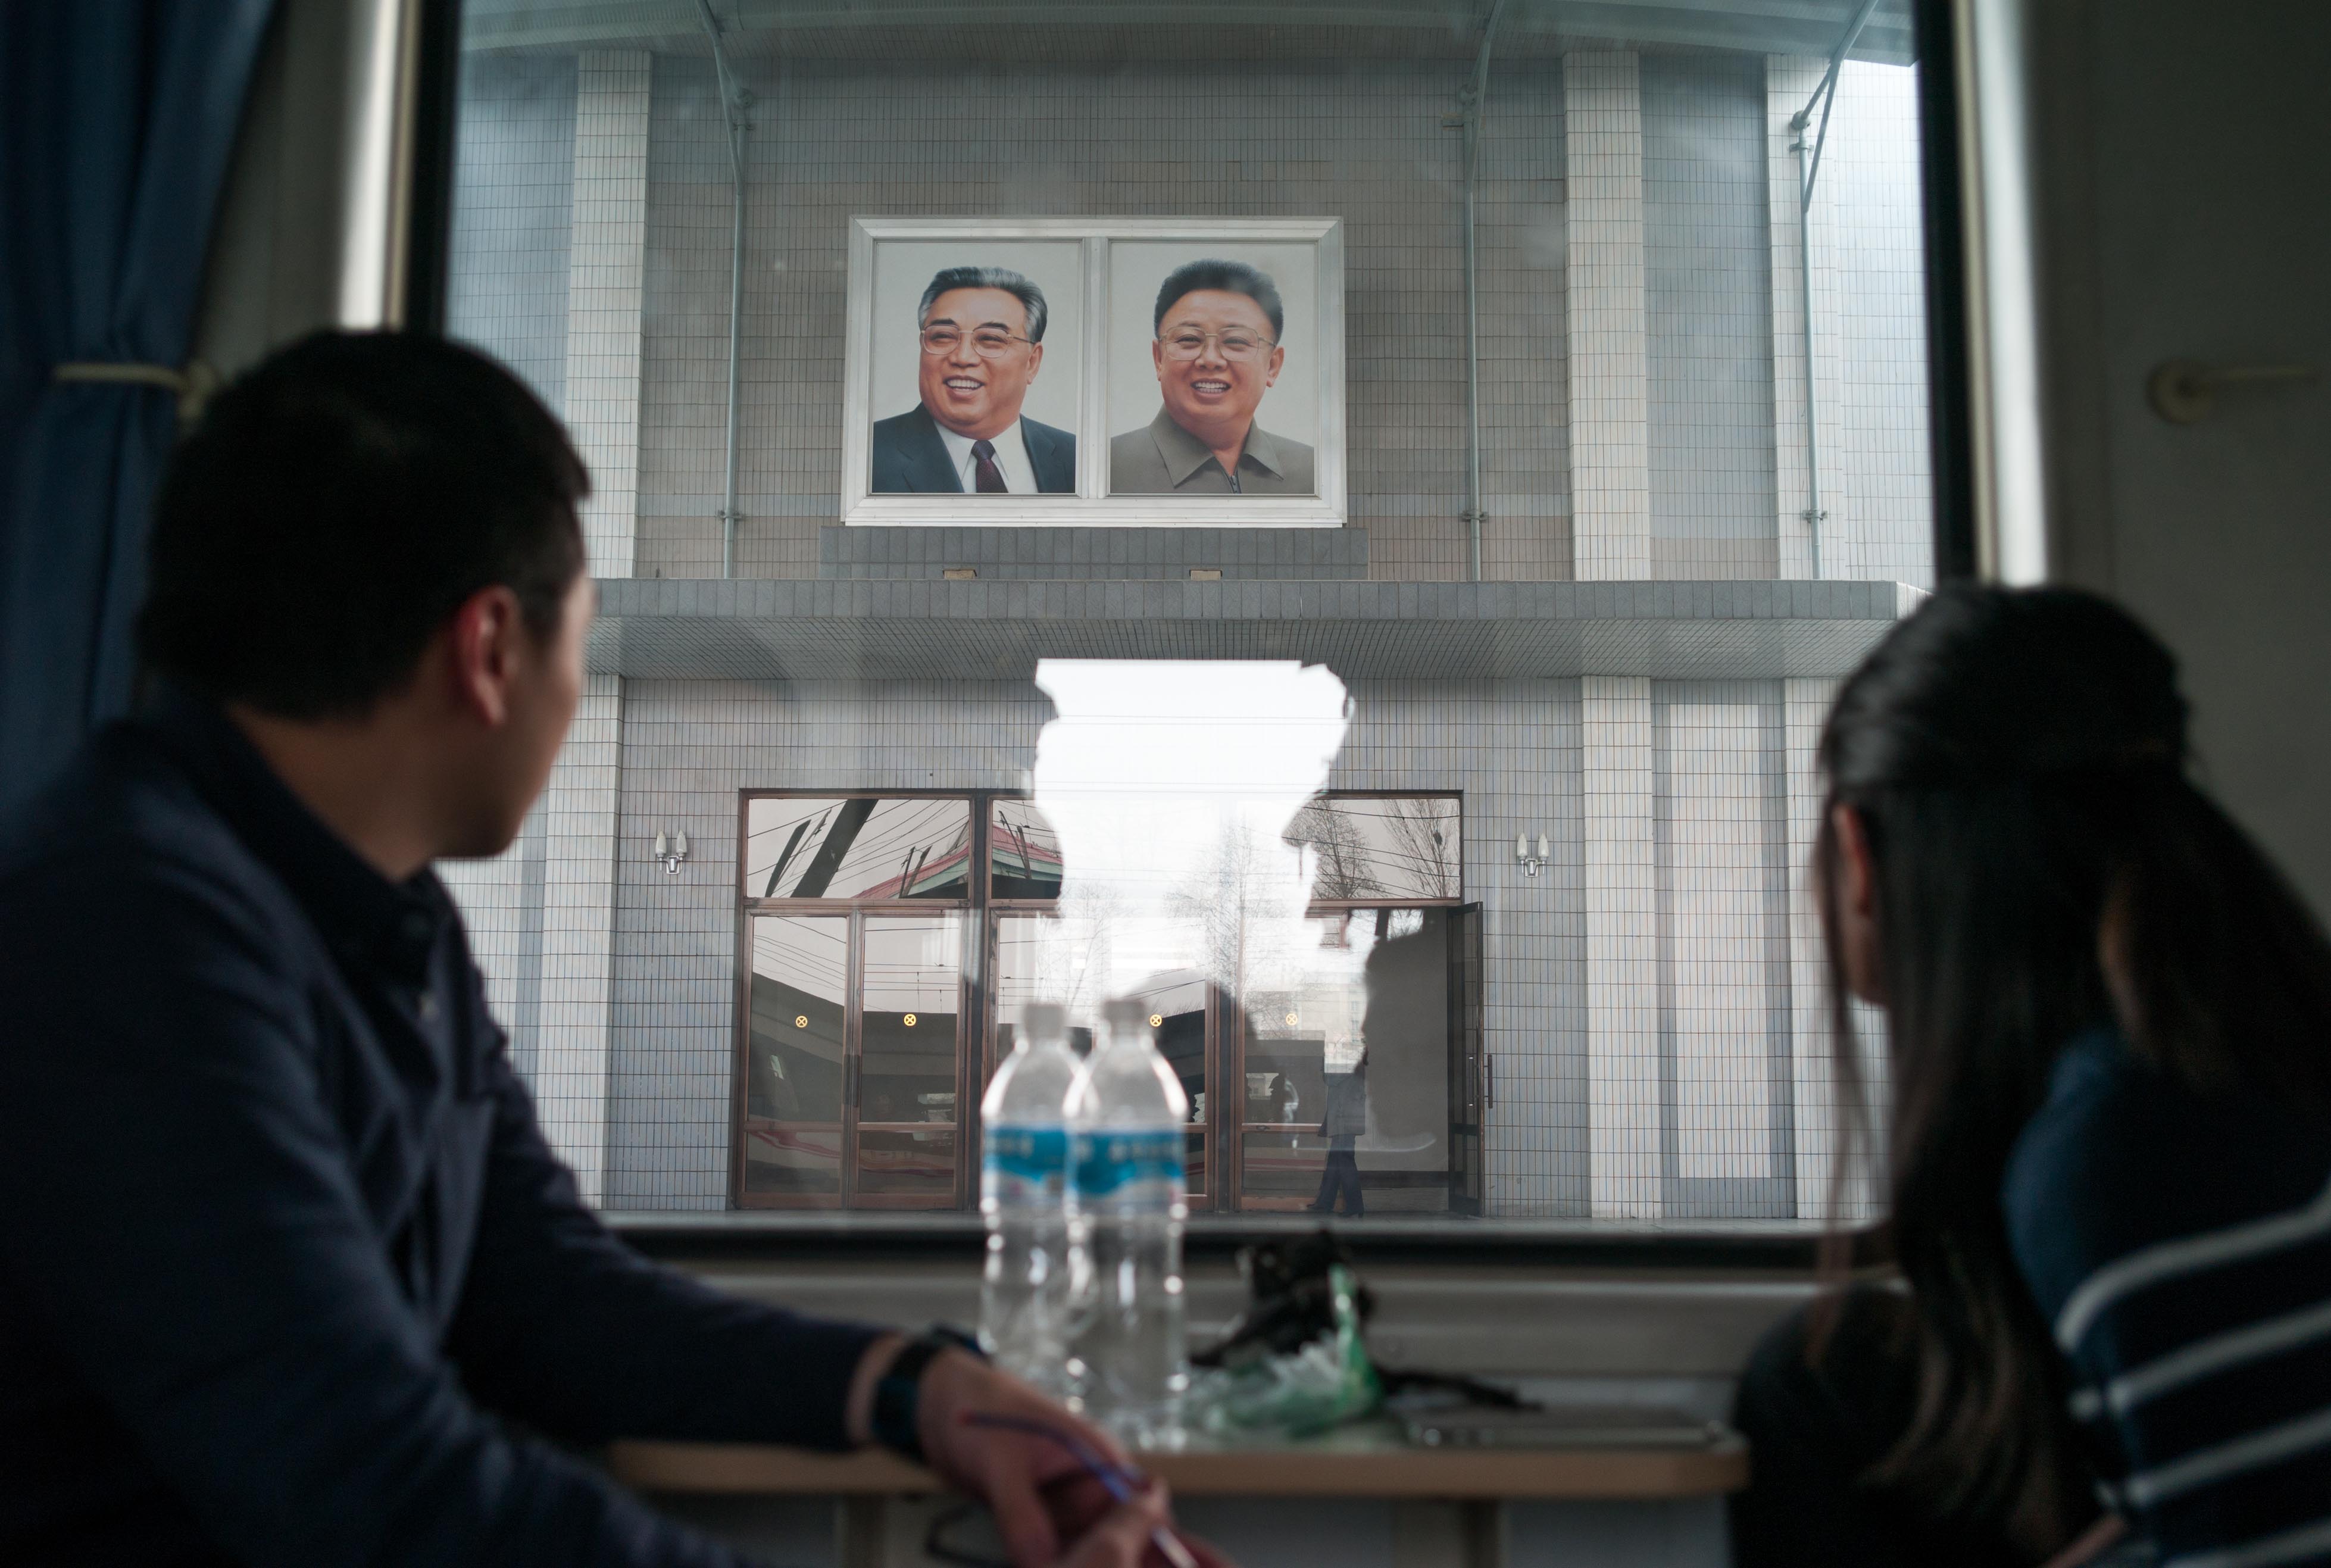 My five days in the DPRK (a.k.a. North Korea)